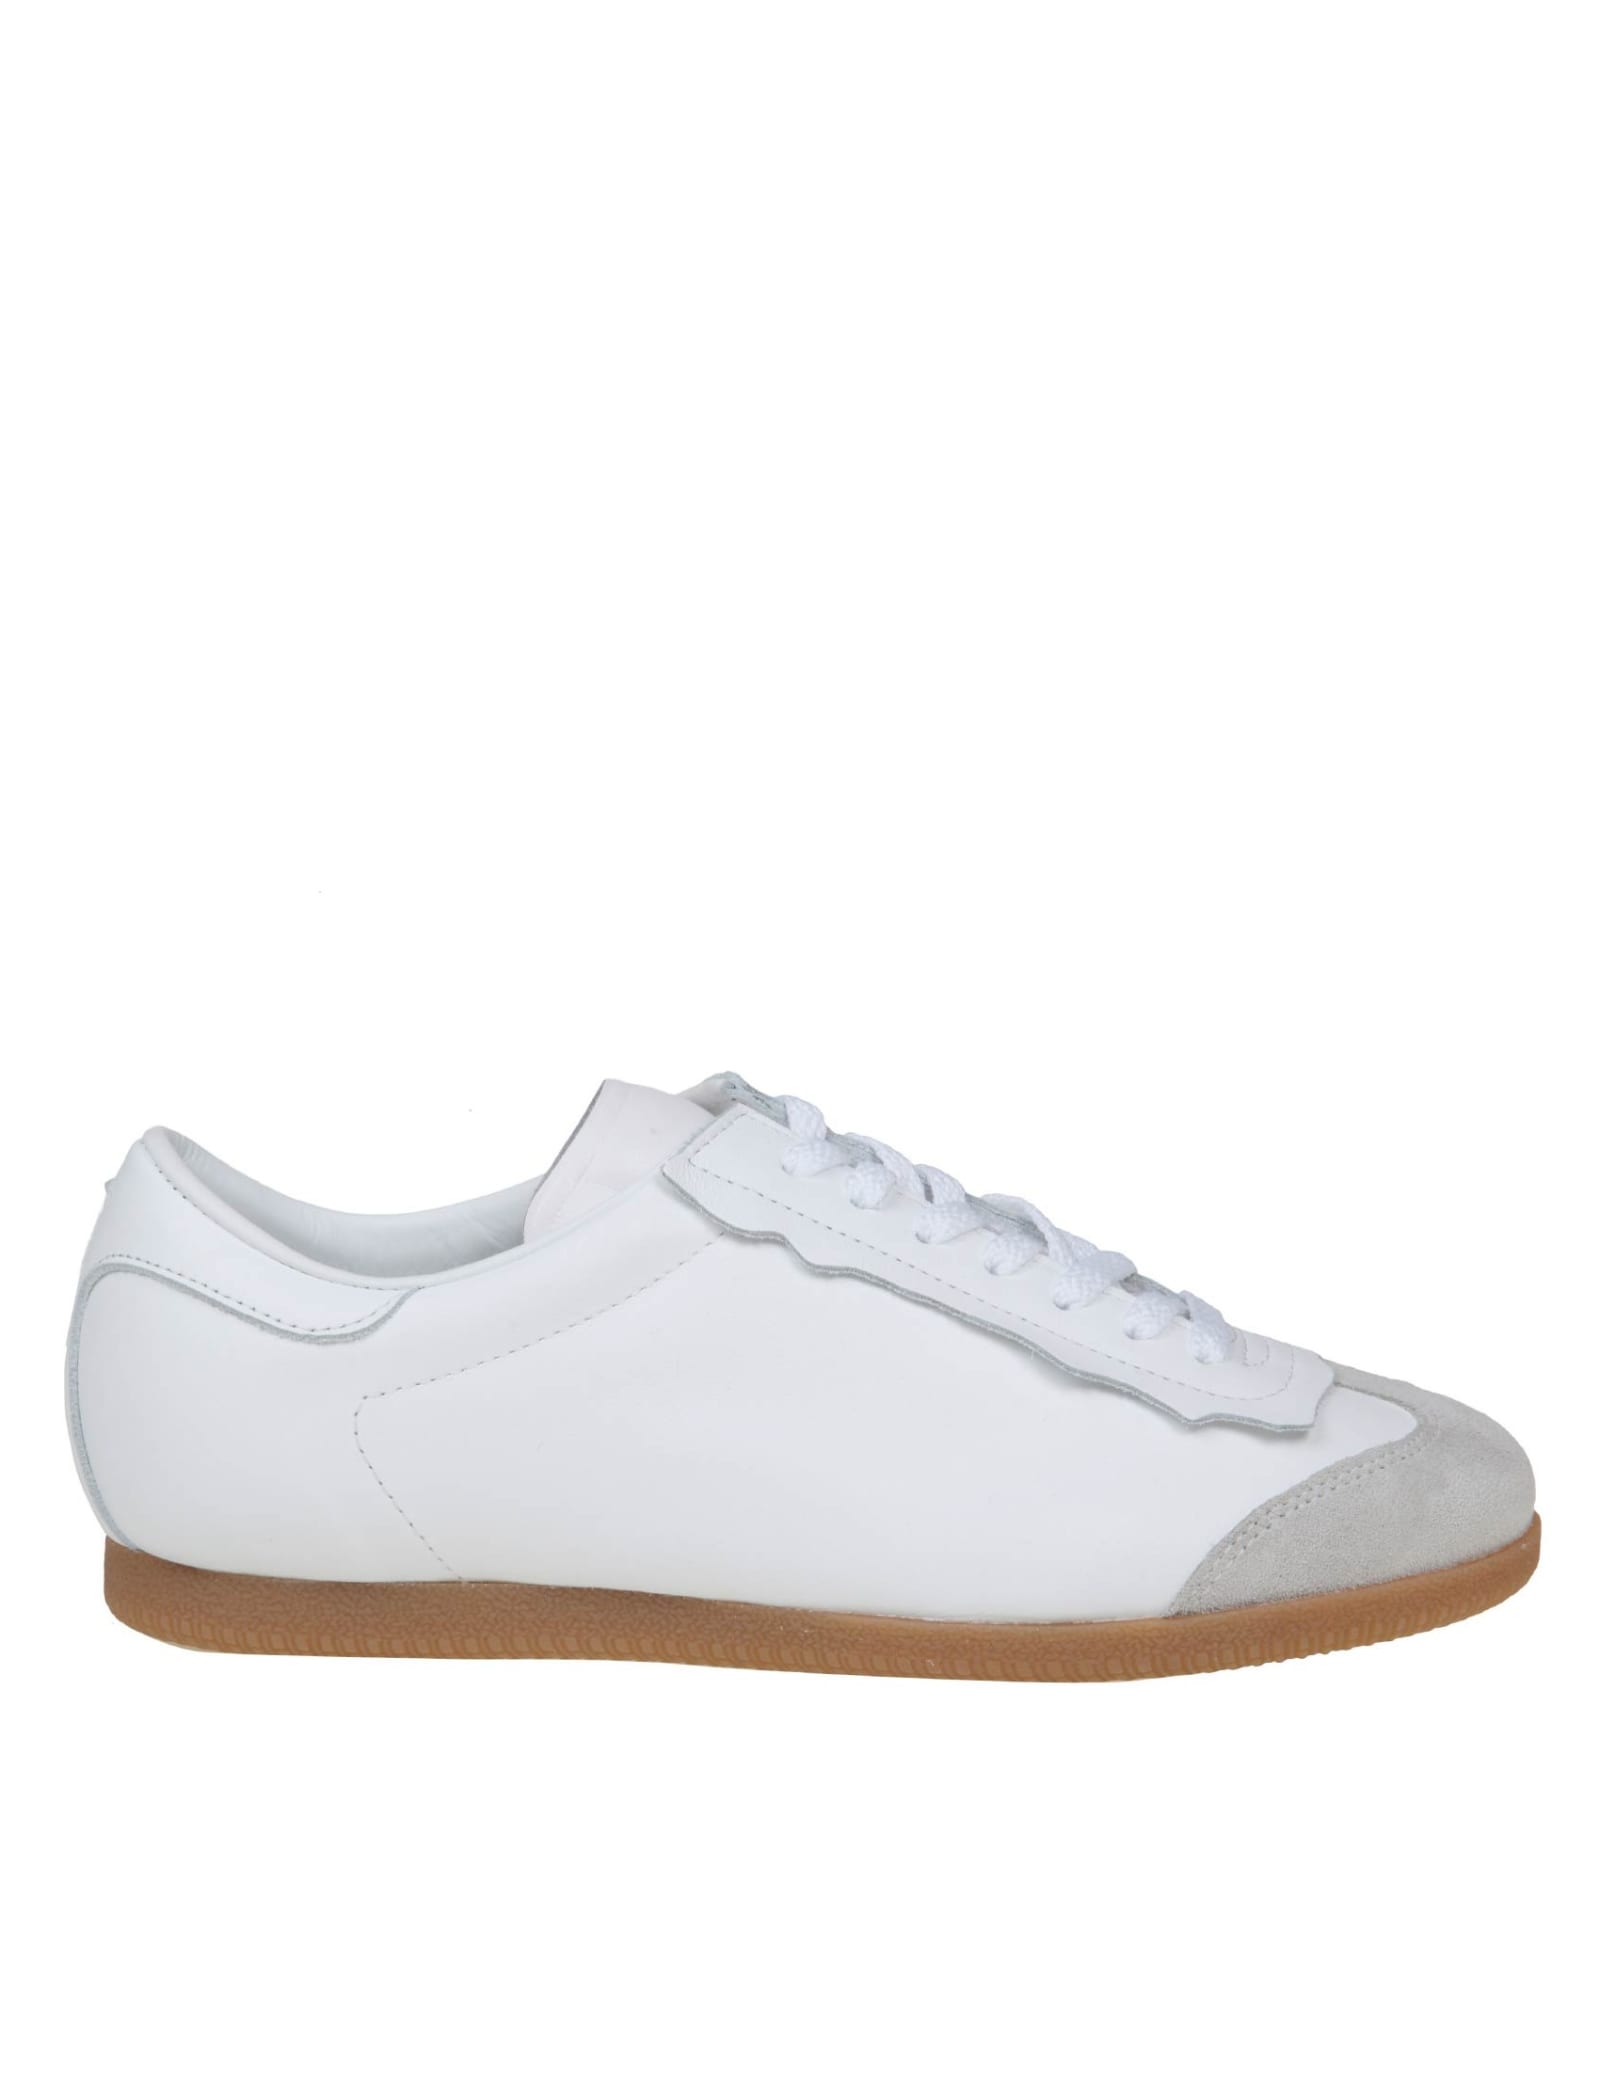 Maison Margiela Sneakers In Leather Color White